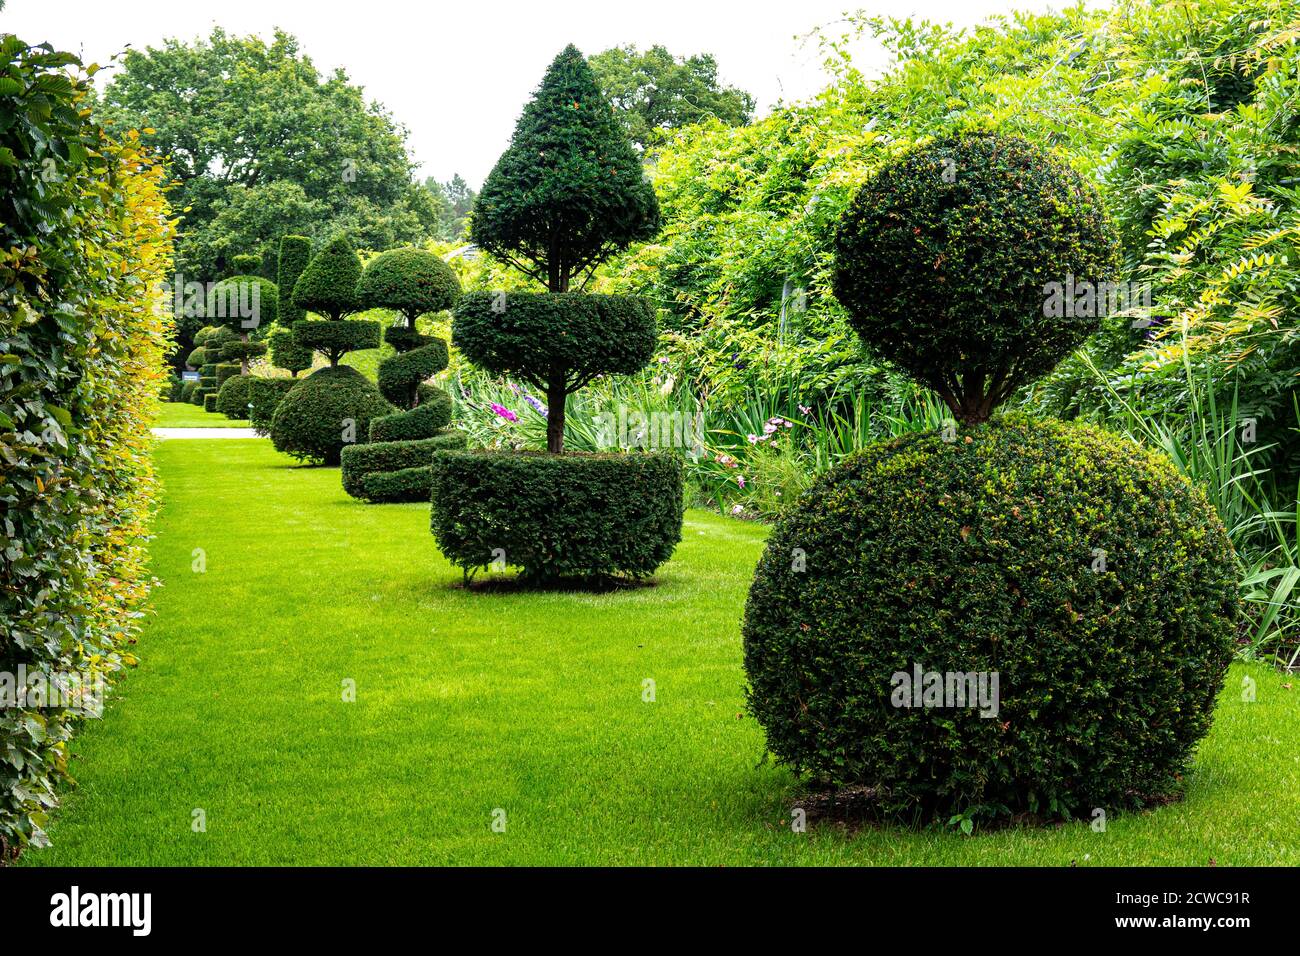 Topiary Avenue Common Yew (taxus baccata) living architecture in a formal garden. Evergreen shrubs & trees into intricate or stylized shapes & forms Stock Photo